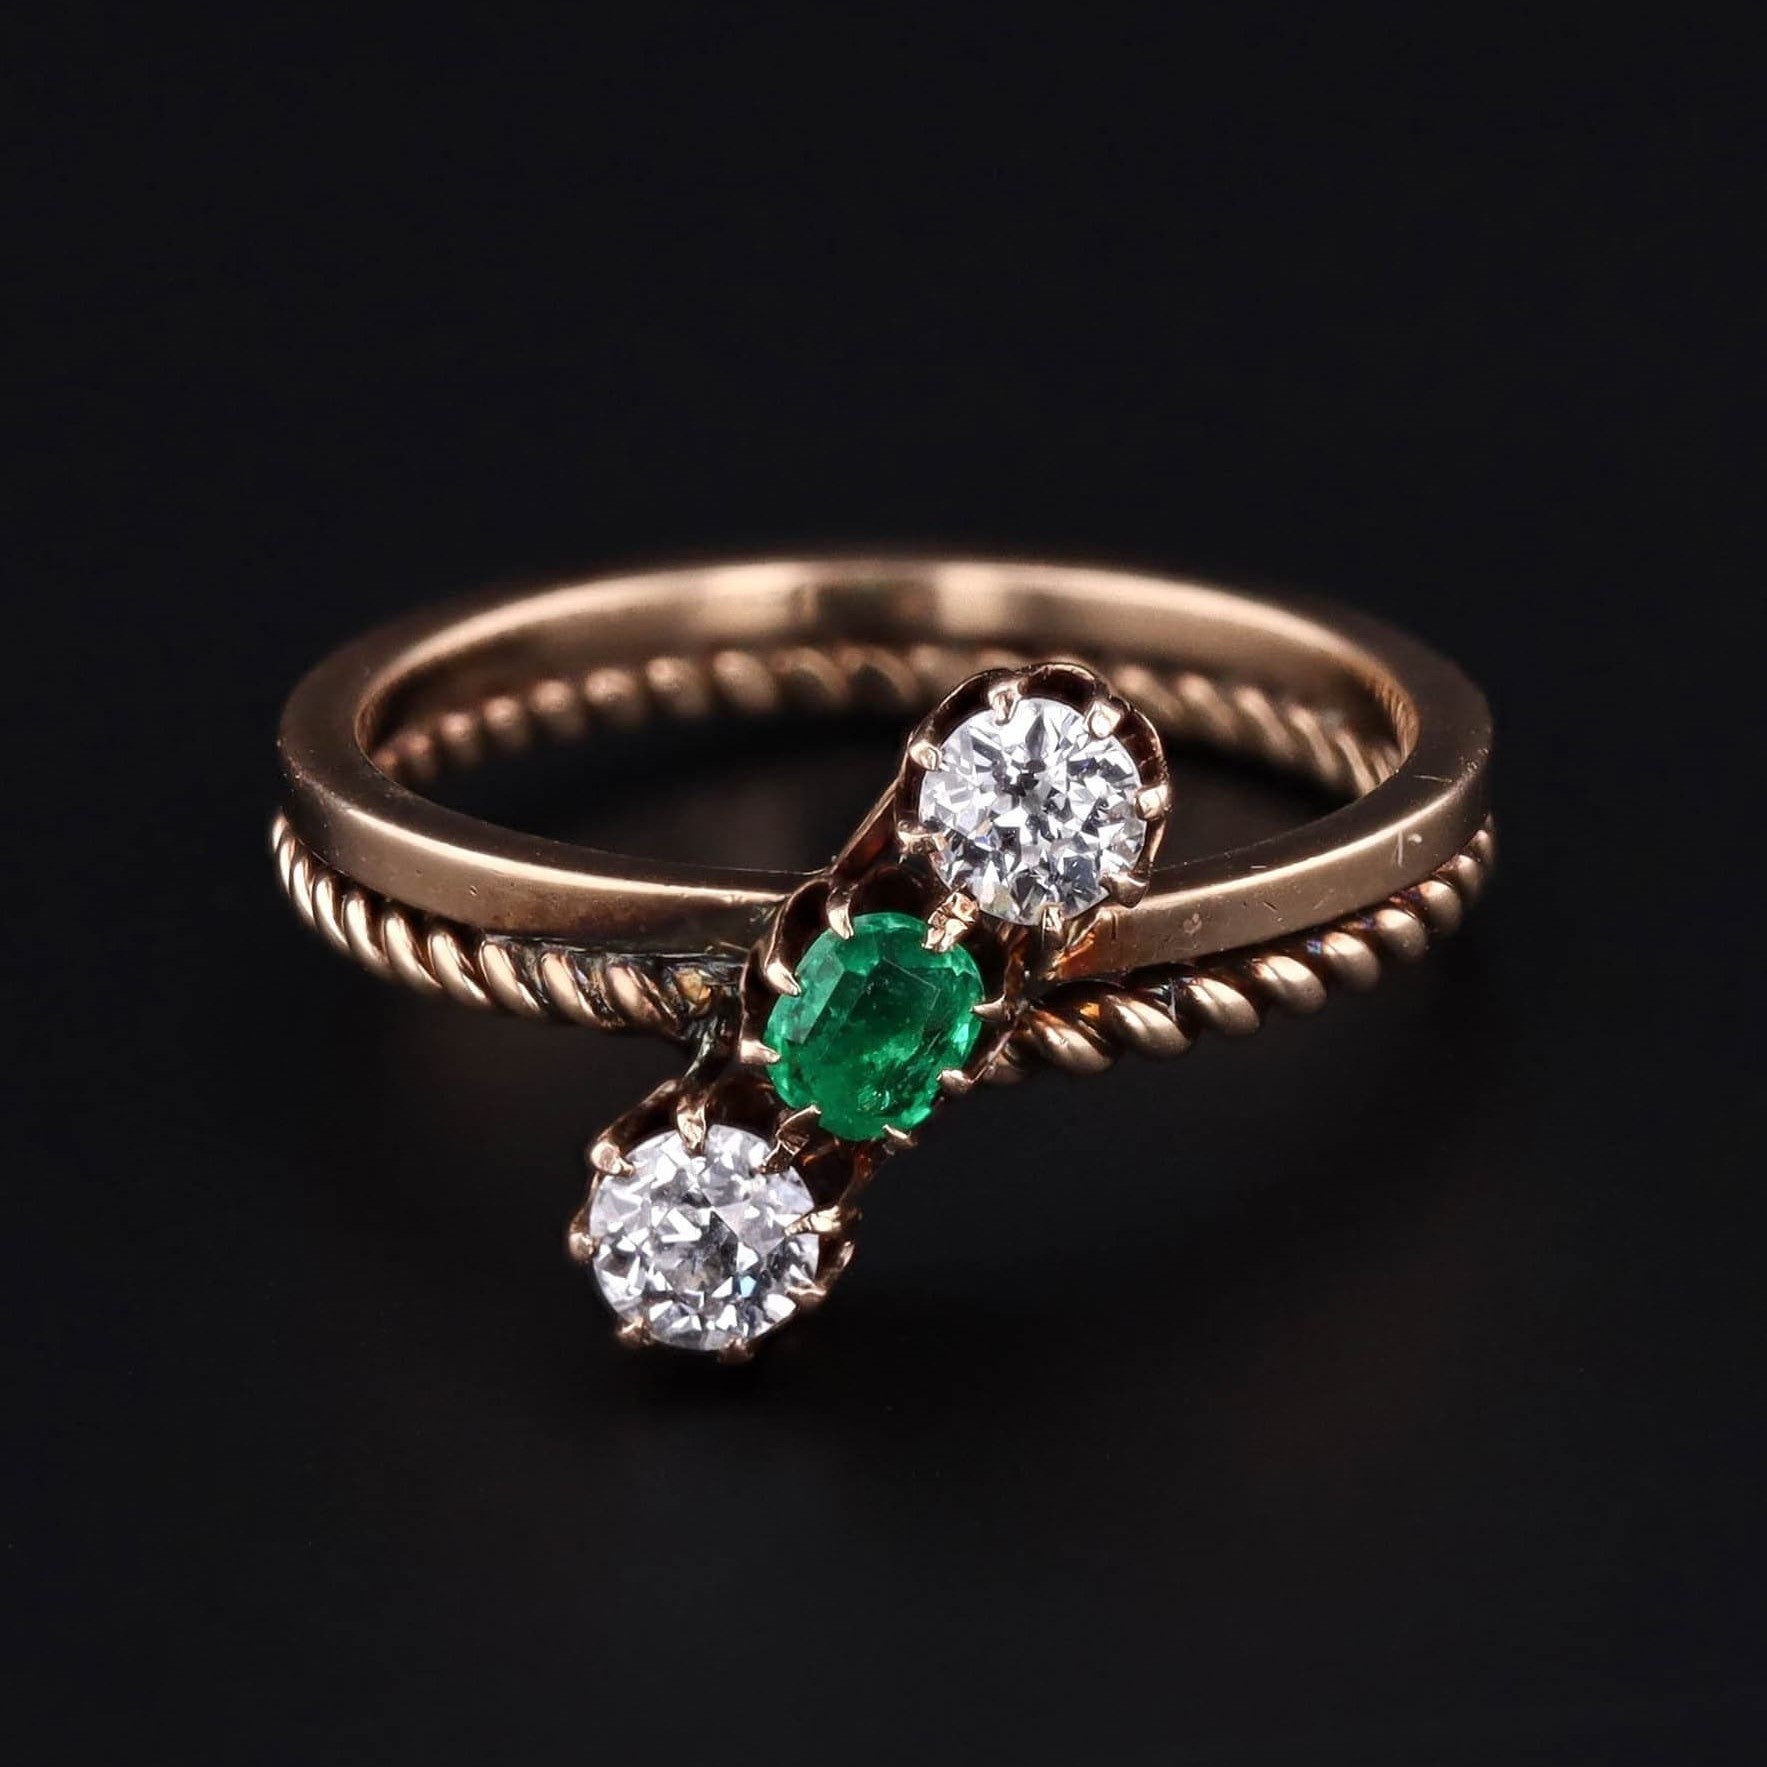 Antique Emerald and Diamond Ring of 14k Gold